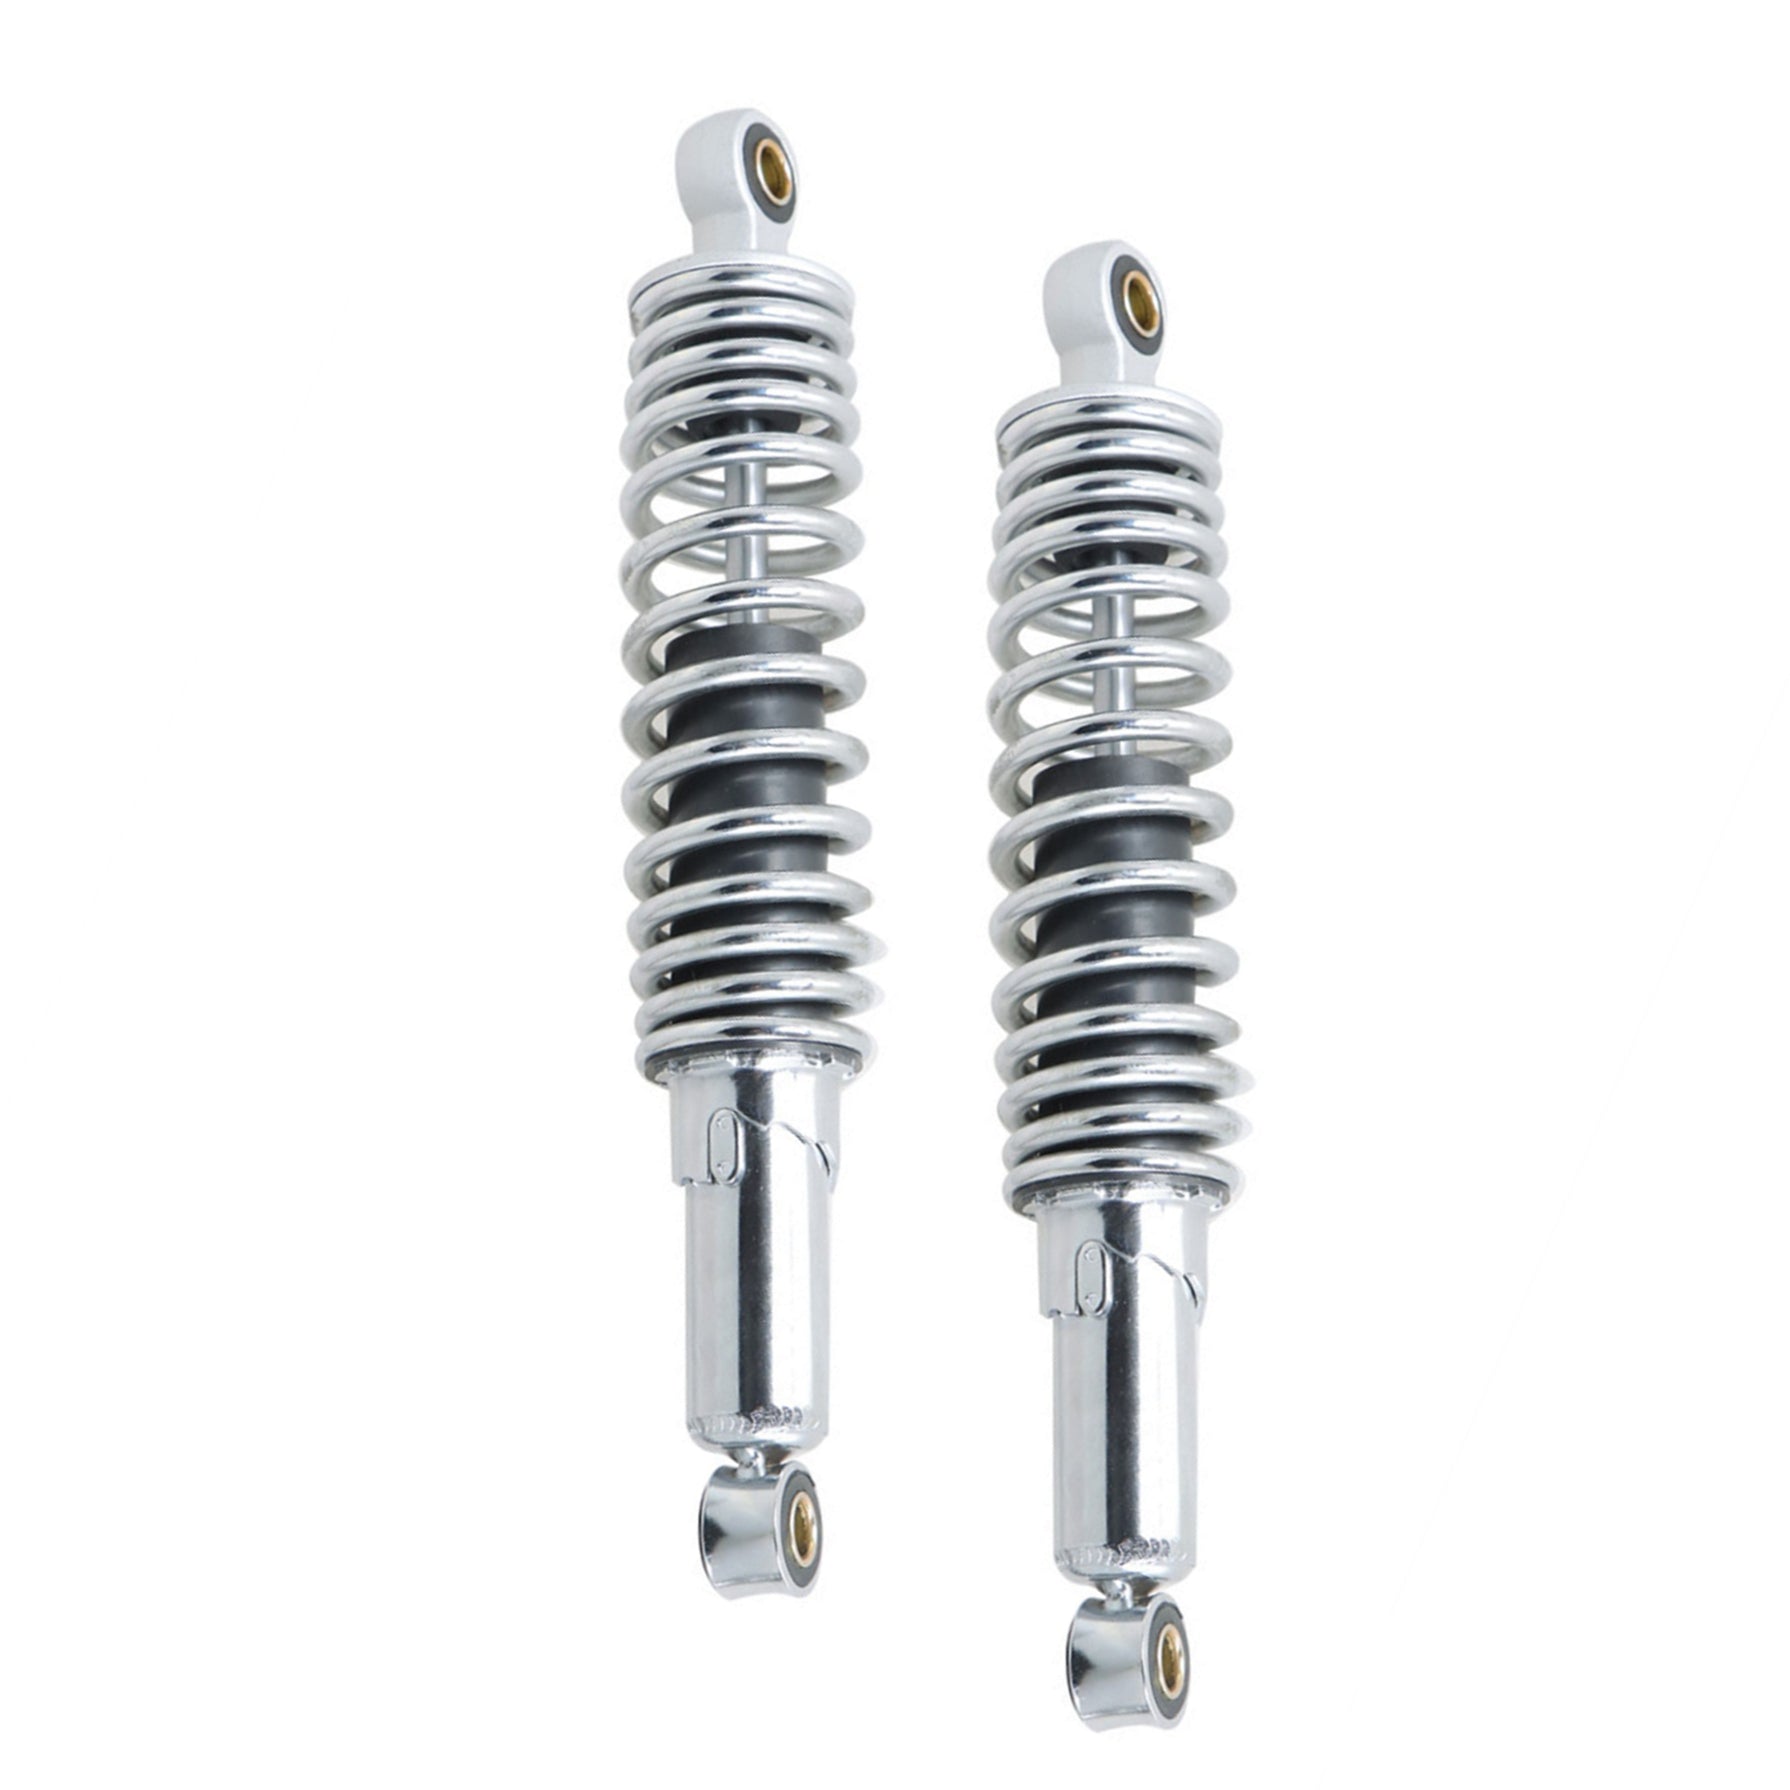 labwork 2pcs Chrome Rear Shocks Absorber 320mm Replacement for XL883 1200 72 48